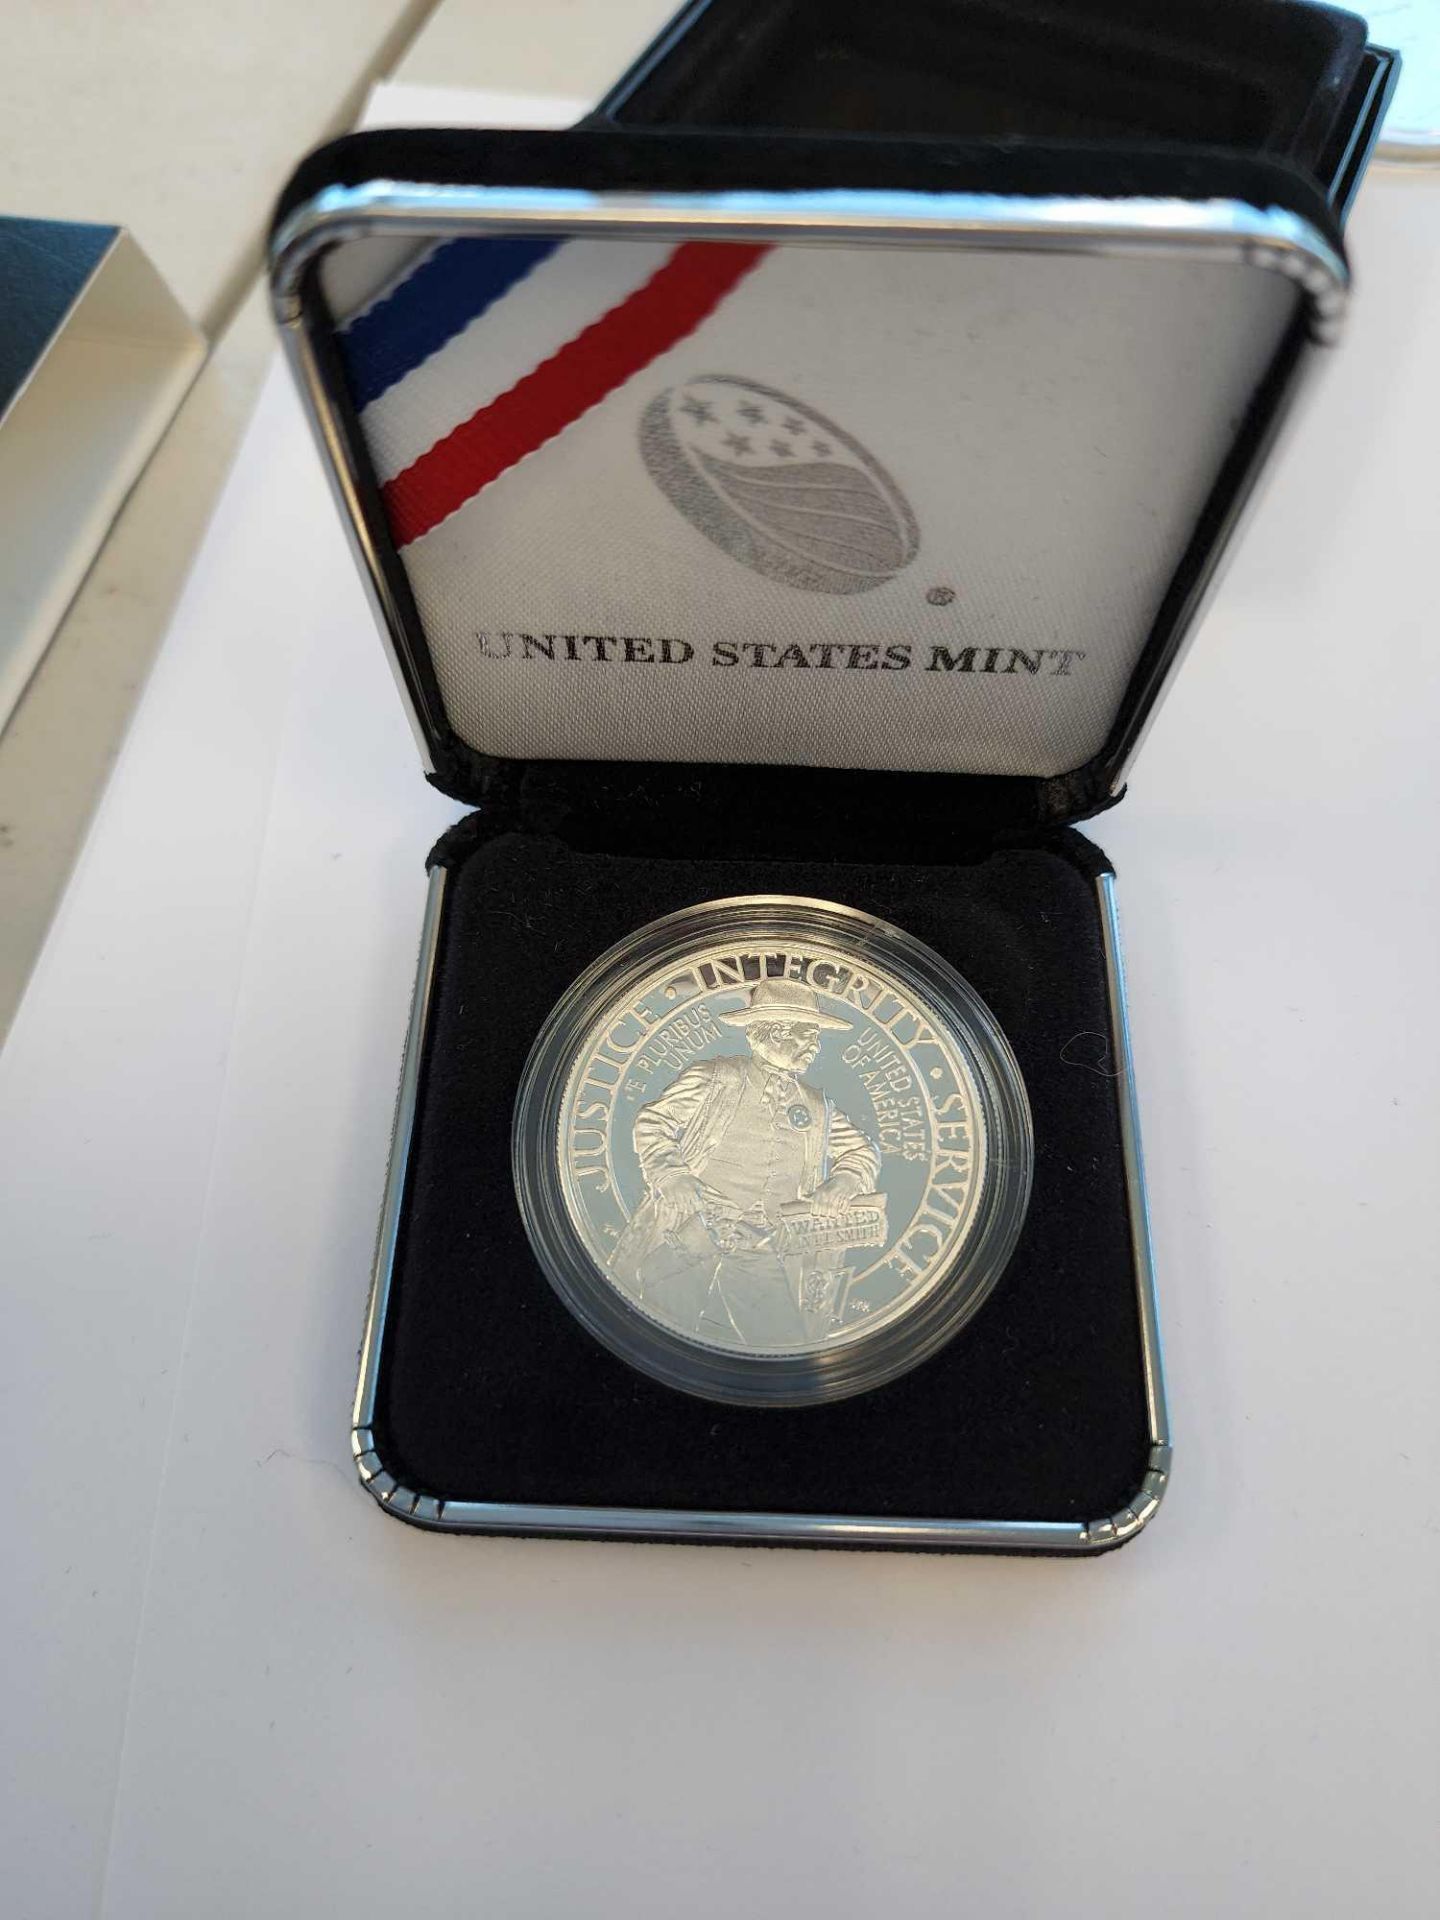 2015 US Marshals Mint Silver Coin - Image 2 of 5